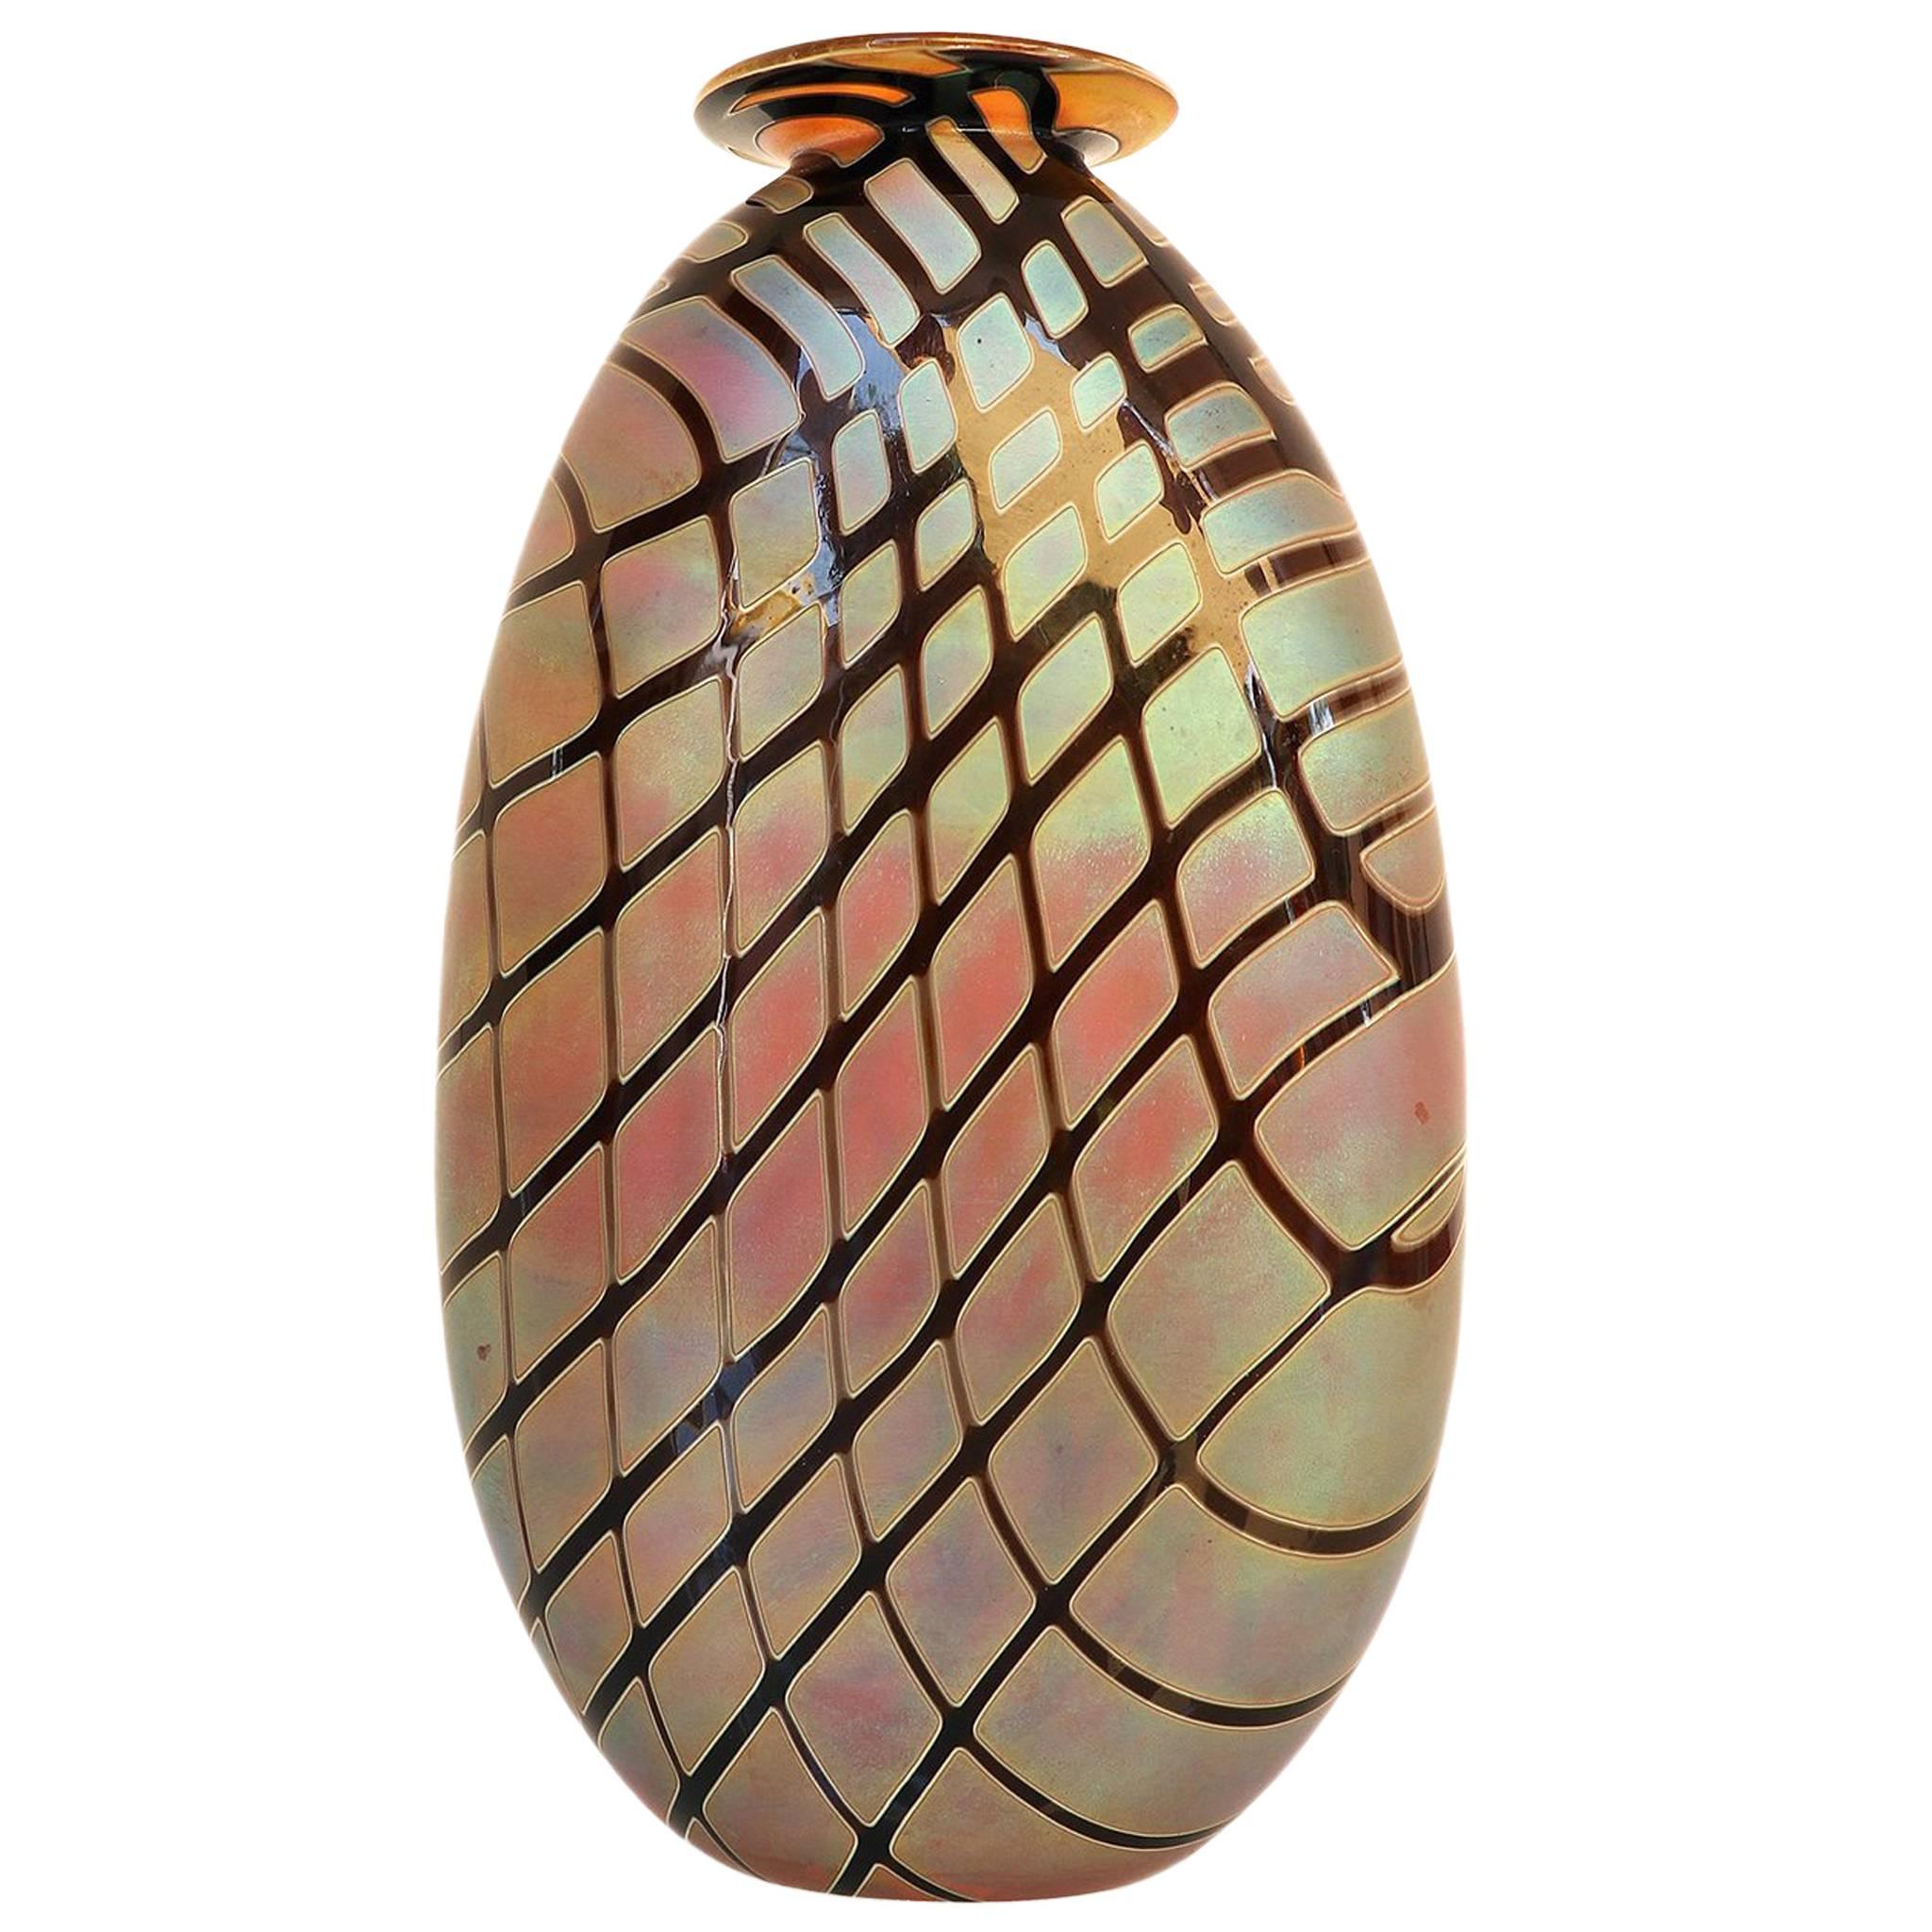 Iridescent Oval Art Glass Vase with Lip by Craig Zweifel, 2003, Signed For Sale